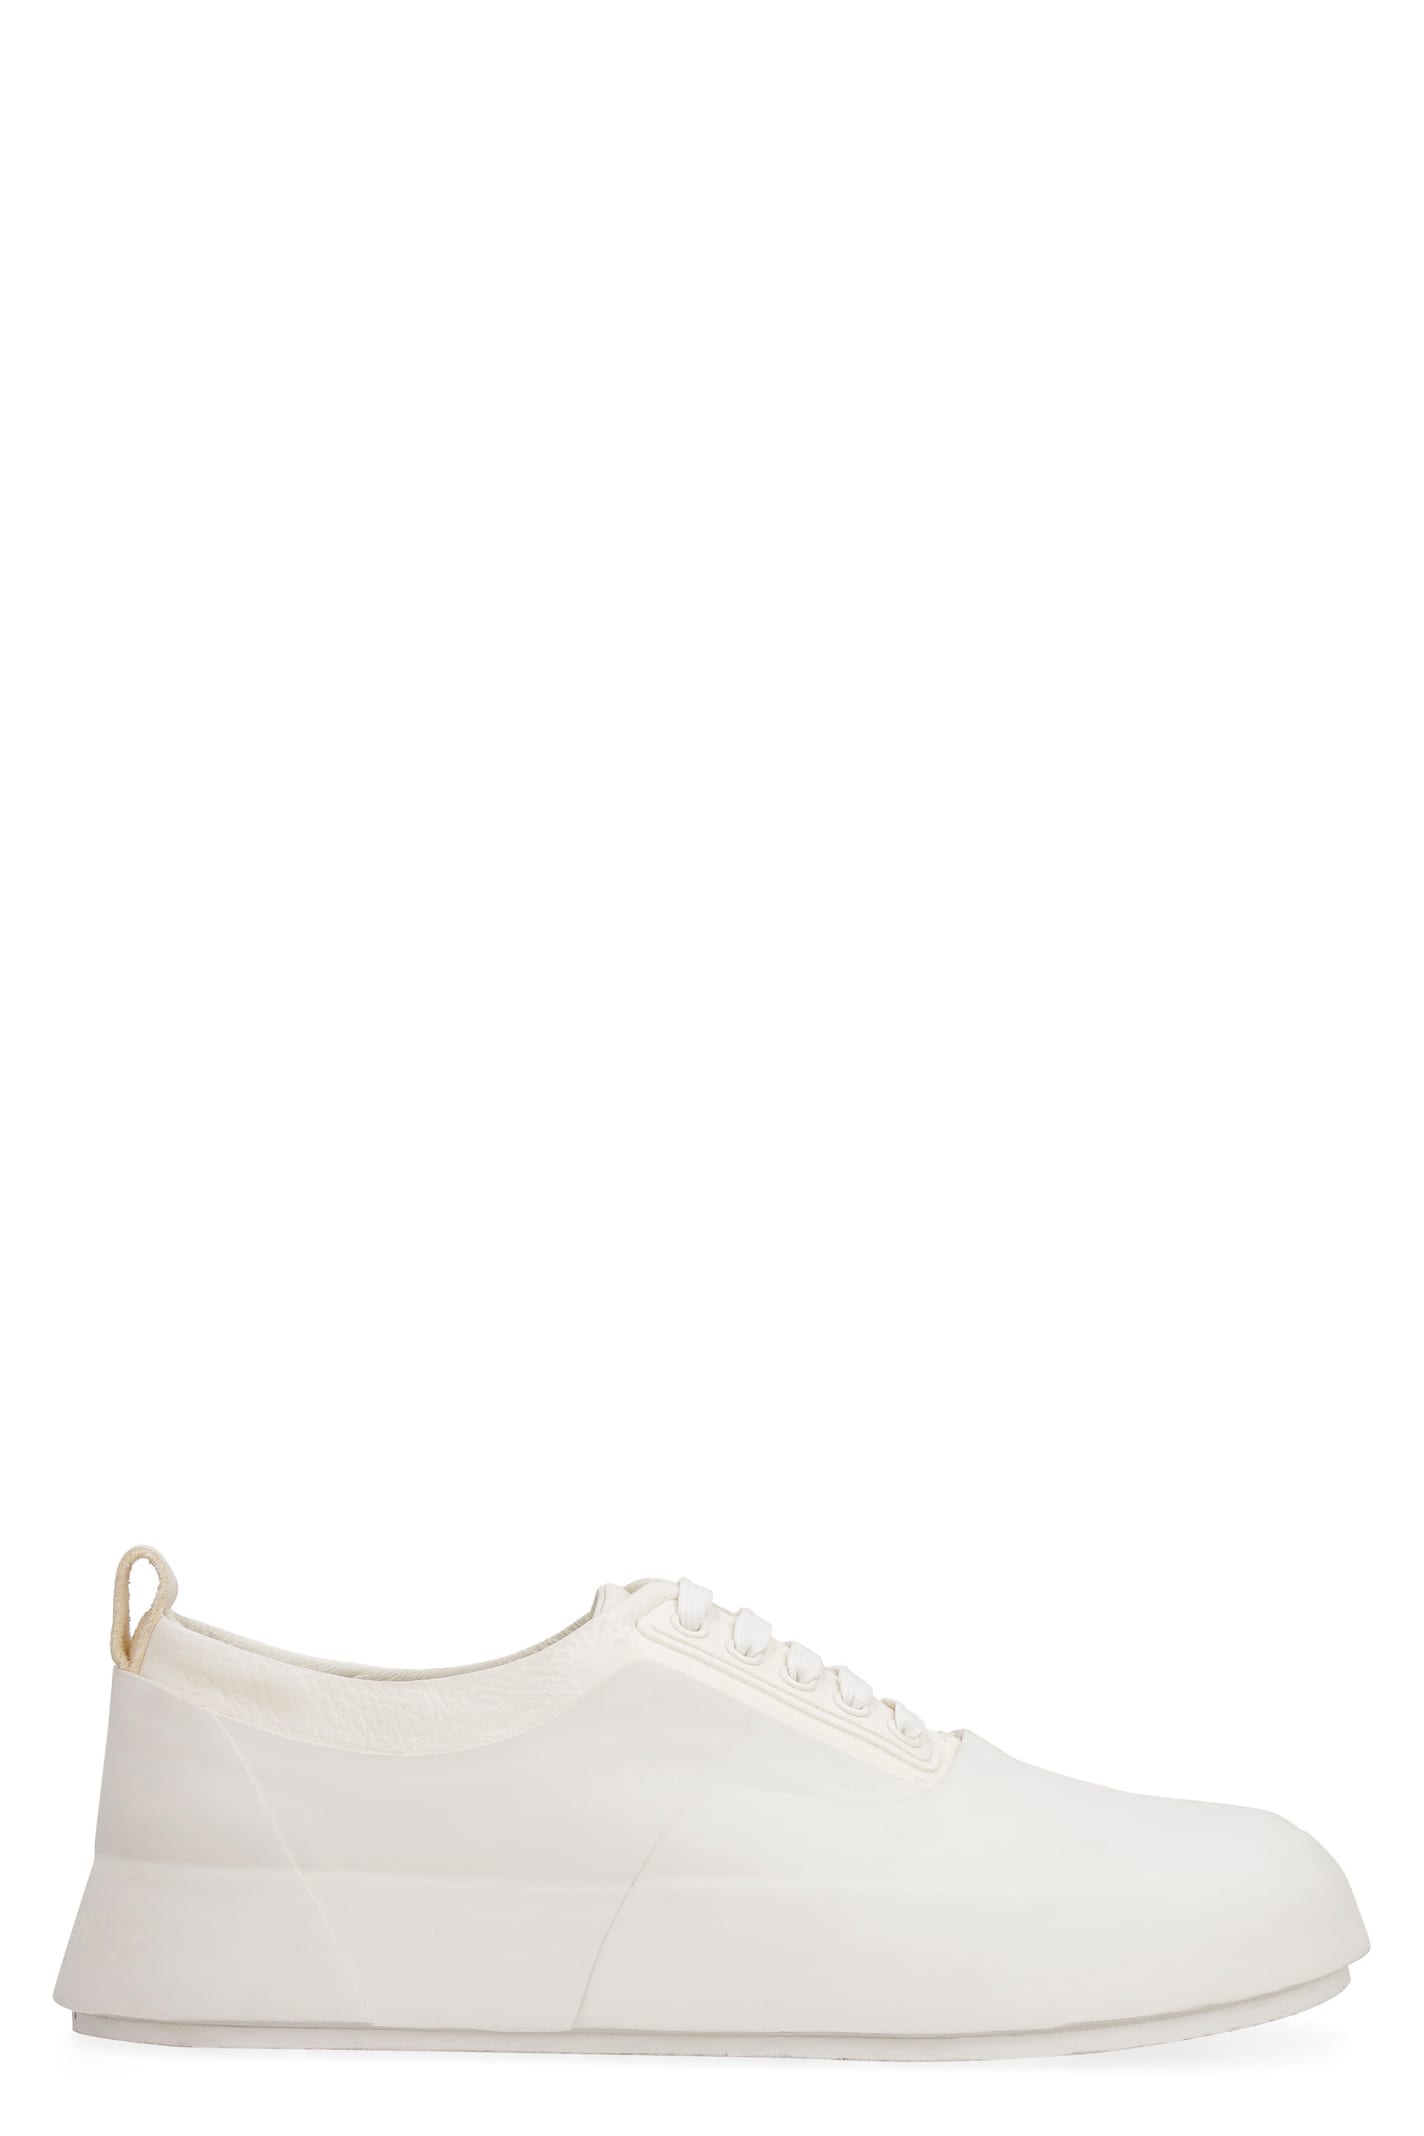 AMBUSH Rubber And Leather Low-top Sneakers